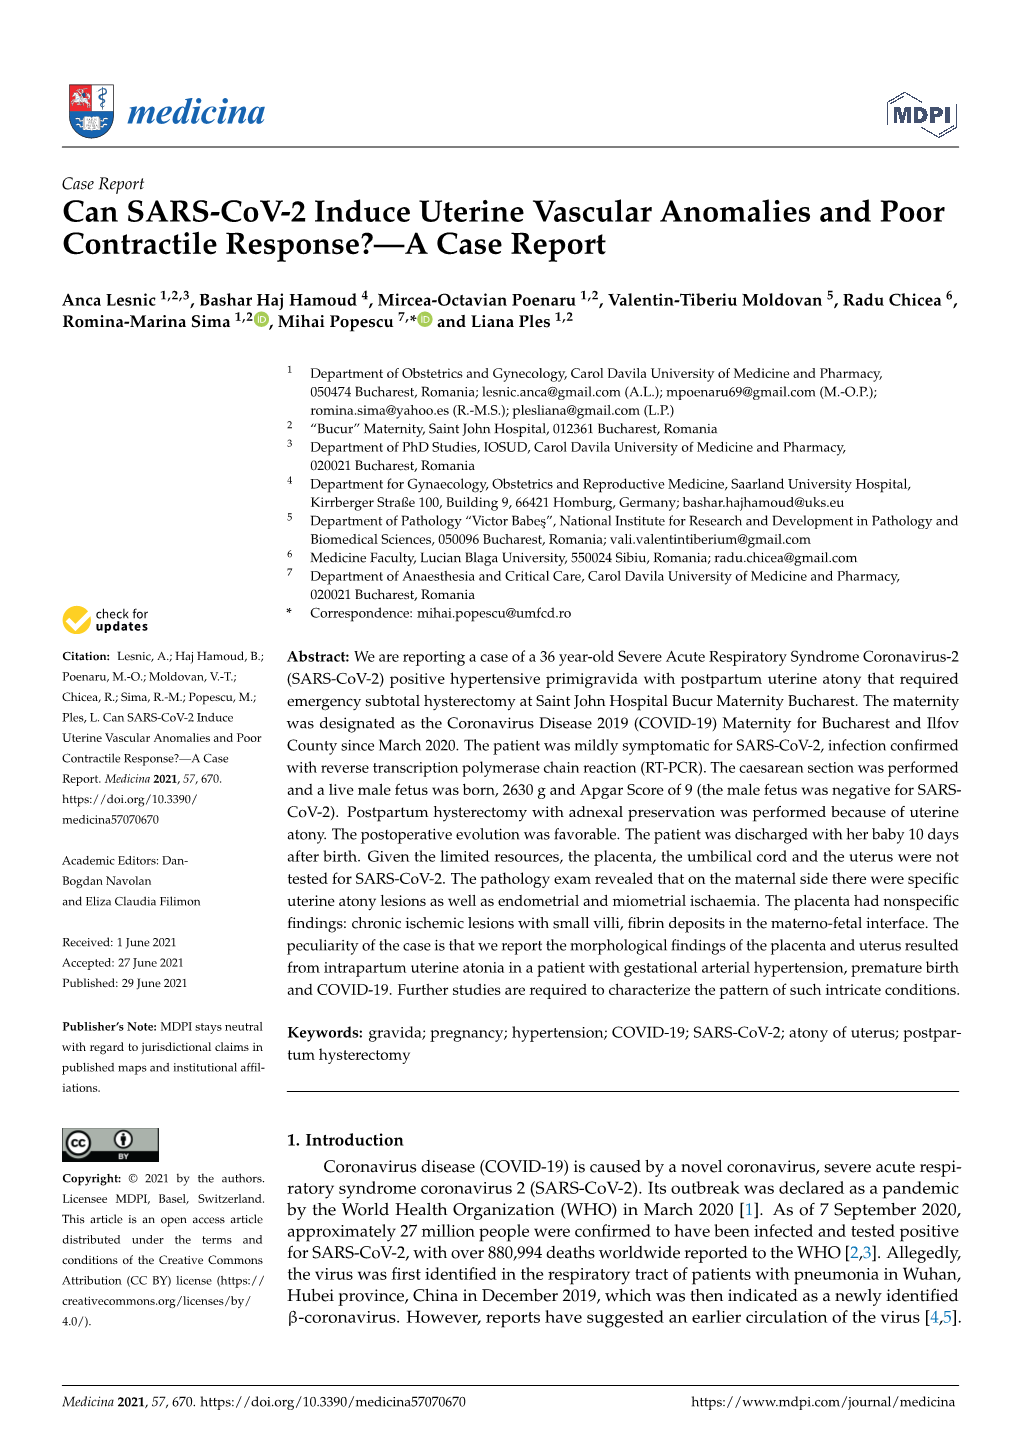 Can SARS-Cov-2 Induce Uterine Vascular Anomalies and Poor Contractile Response?—A Case Report